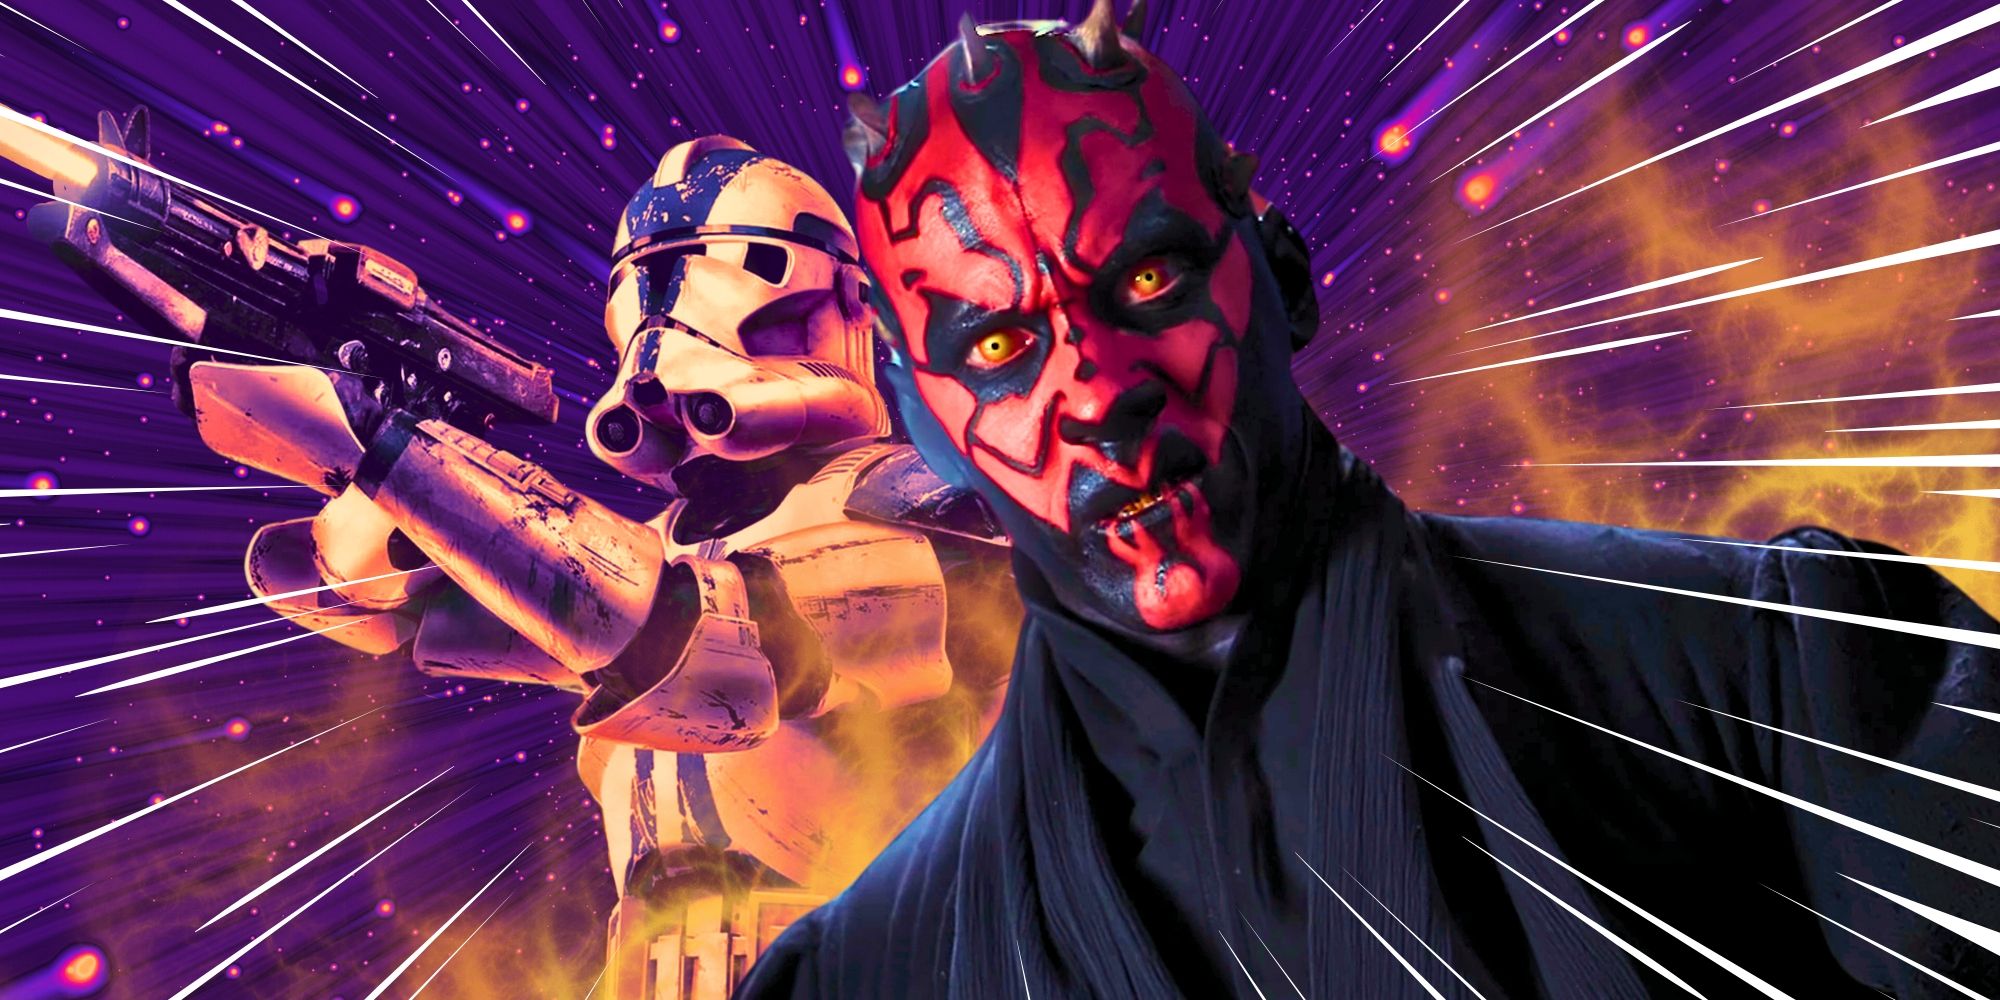 Star Wars: Battlefront Classic Collection cover art with Darth Maul looking upset